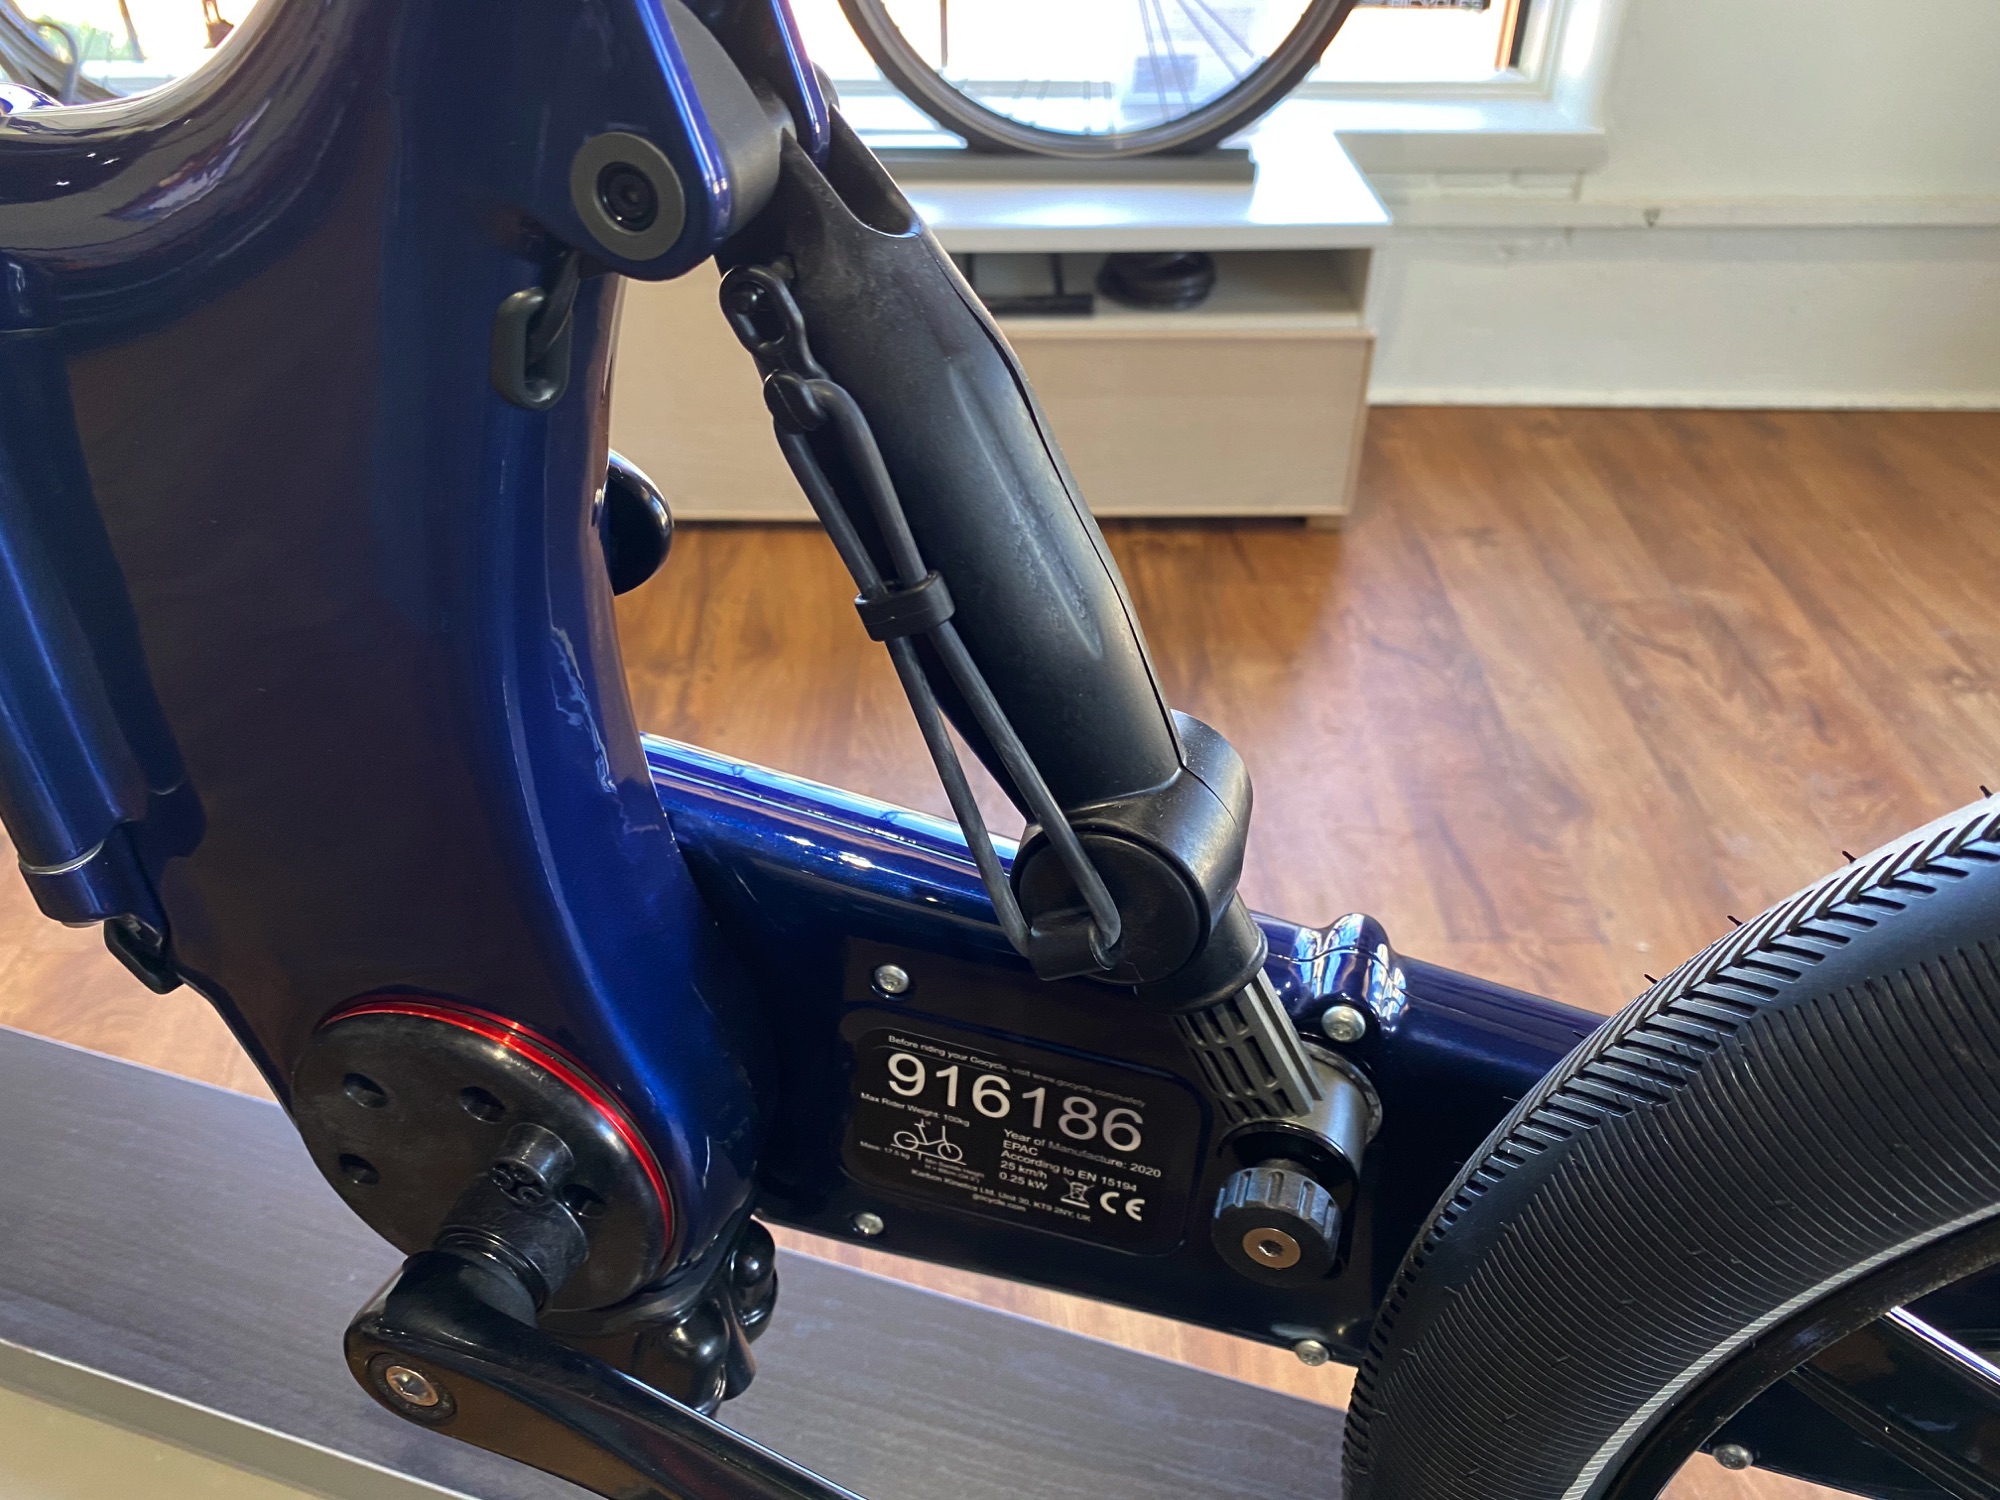 Gocycle GX electric bicycle, eBike Central, Greensboro and Charlotte NC